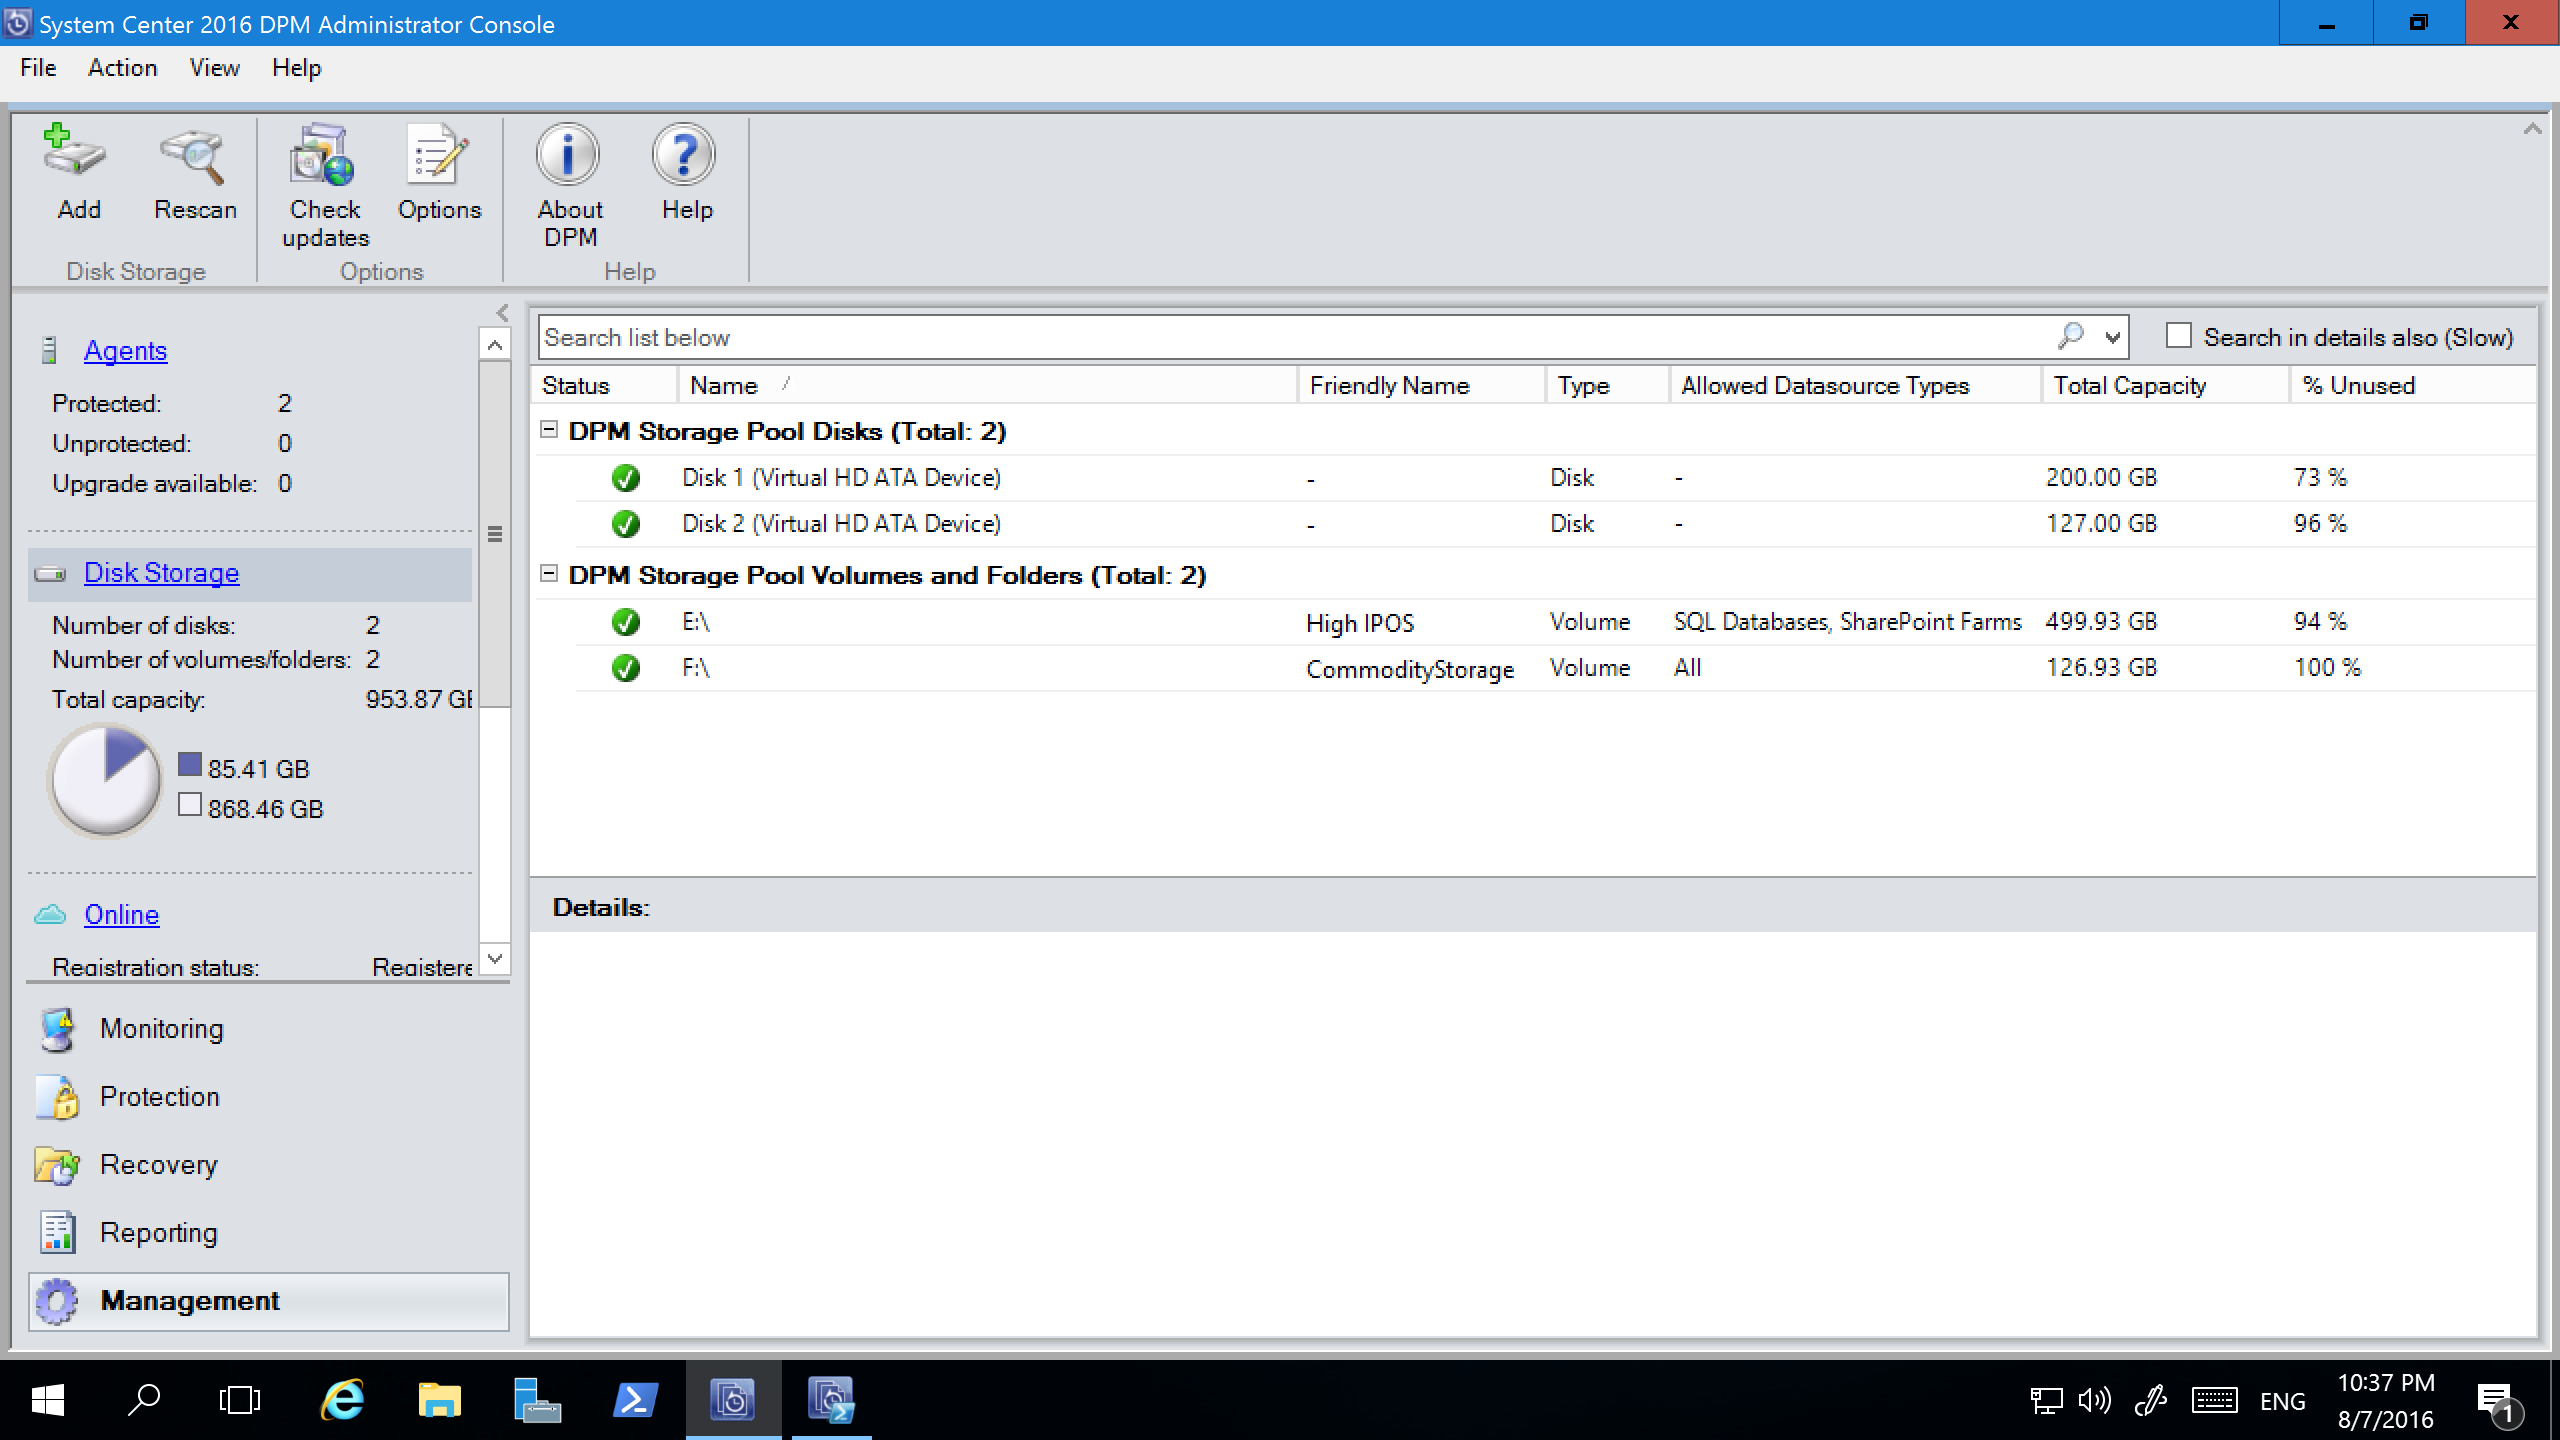 Screenshot shows the disks and volumes in the Administrator Console.